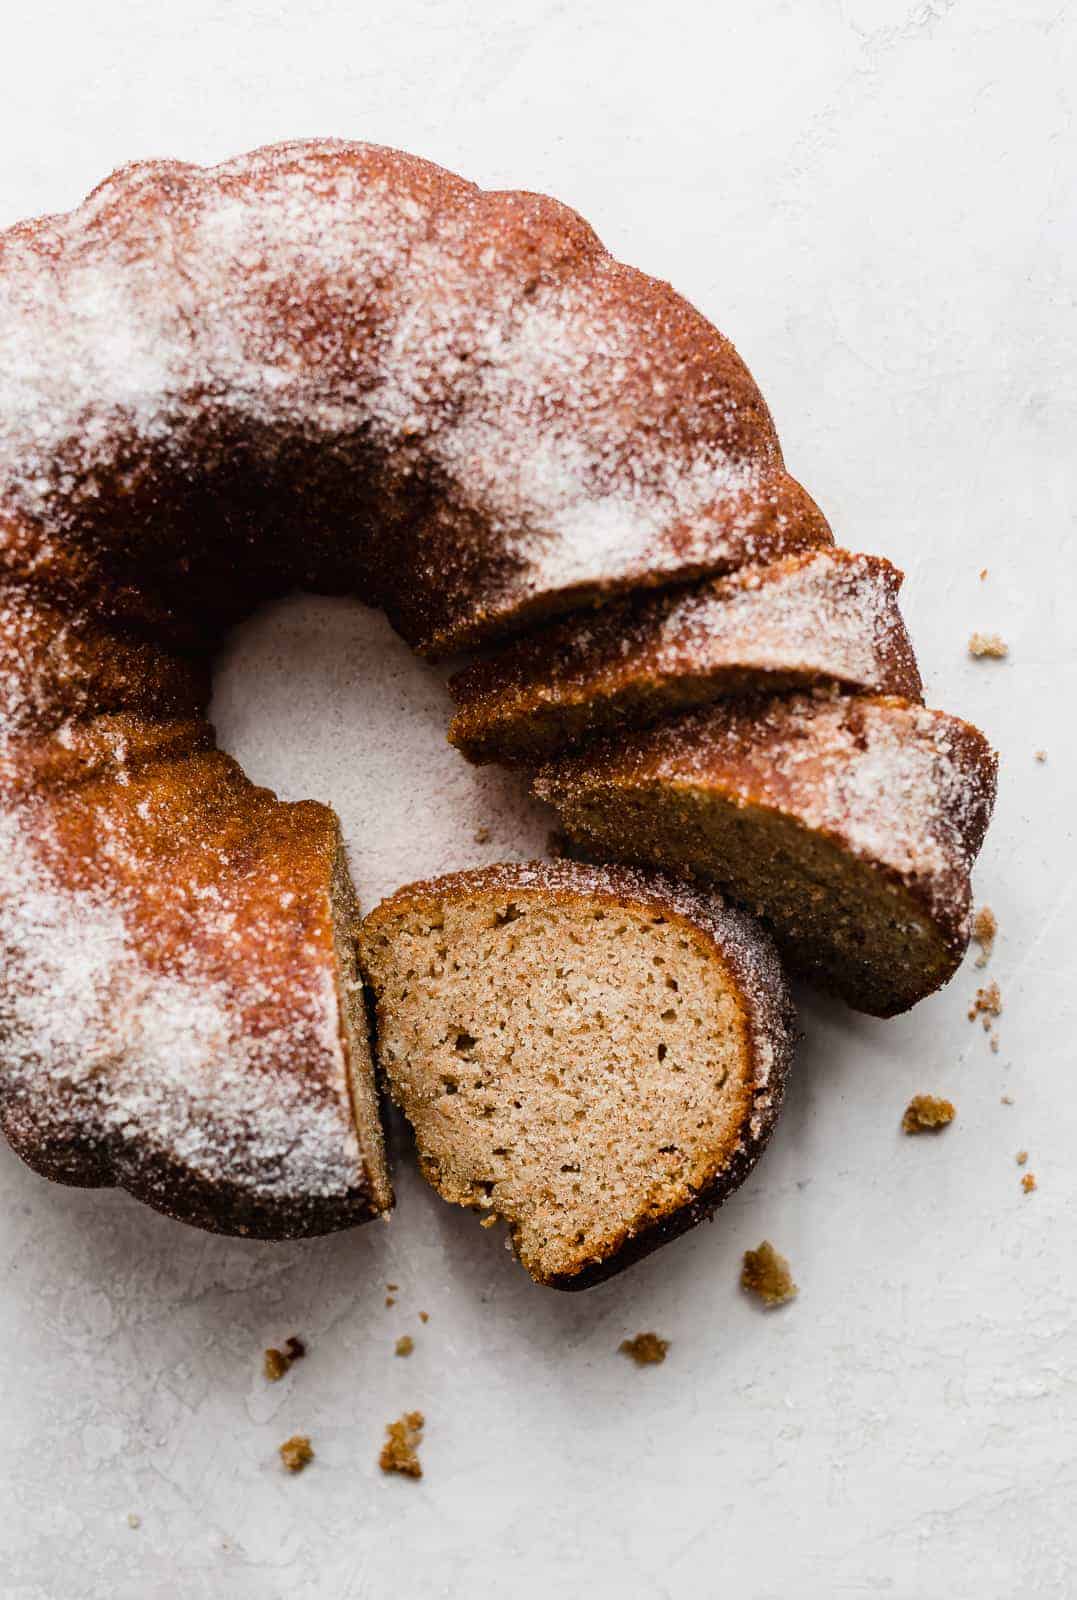 Overhead photo of an apple cider Bundt Cake against a white background.